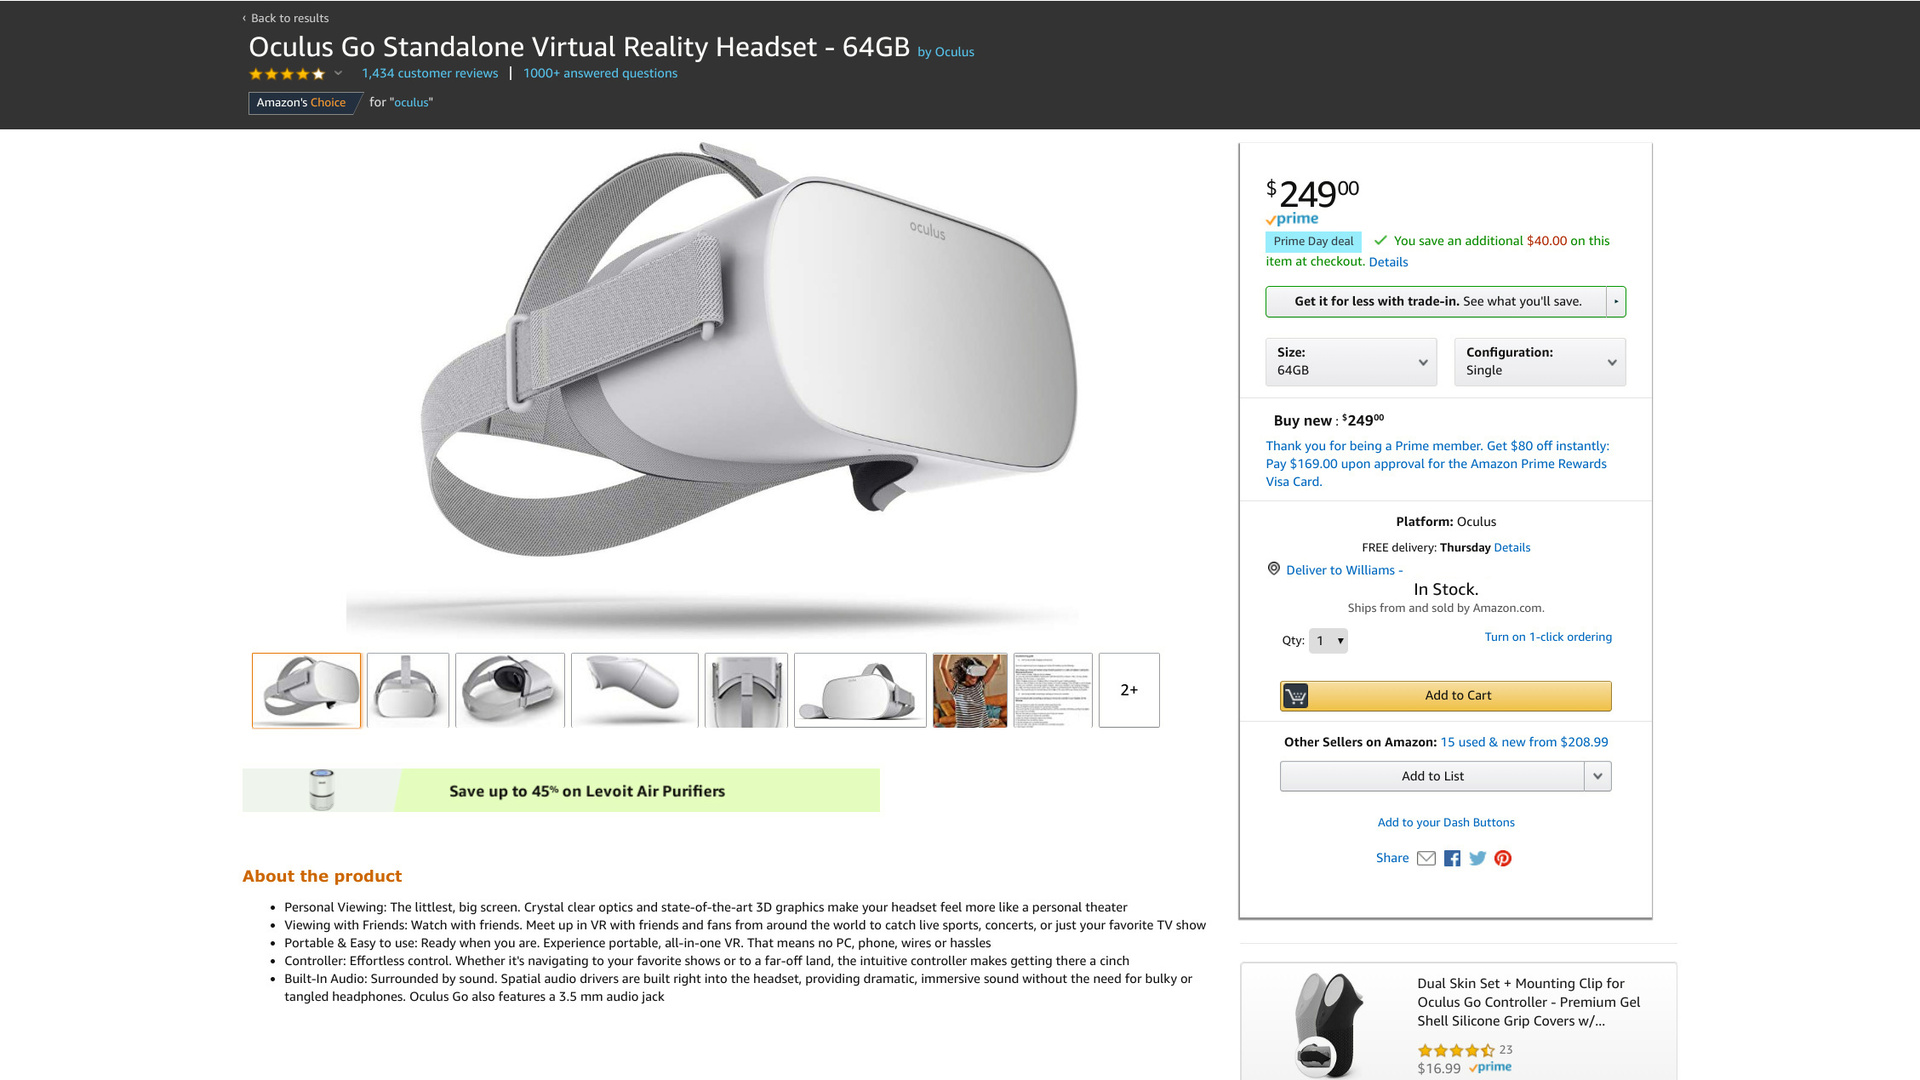 Amazon Prime Day deal on the Oculus Go